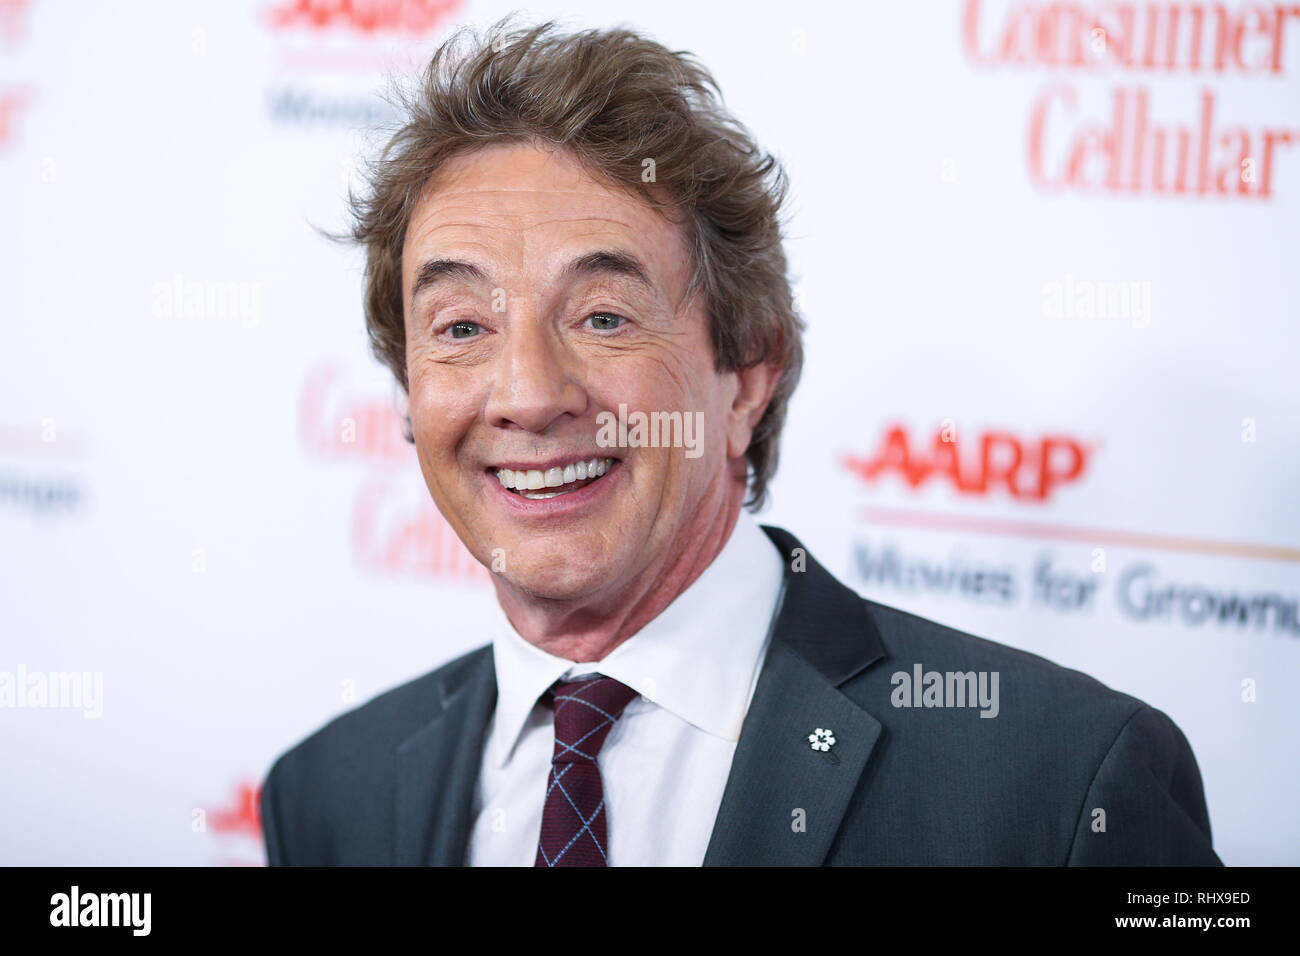 BEVERLY HILLS, LOS ANGELES, CA, USA - FEBRUARY 04: Actor Martin Short arrives at the AARP The Magazine's 18th Annual Movies for Grownups Awards held at the Beverly Wilshire Four Seasons Hotel on February 4, 2019 in Beverly Hills, Los Angeles, California, United States. (Photo by Xavier Collin/Image Press Agency) Stock Photo